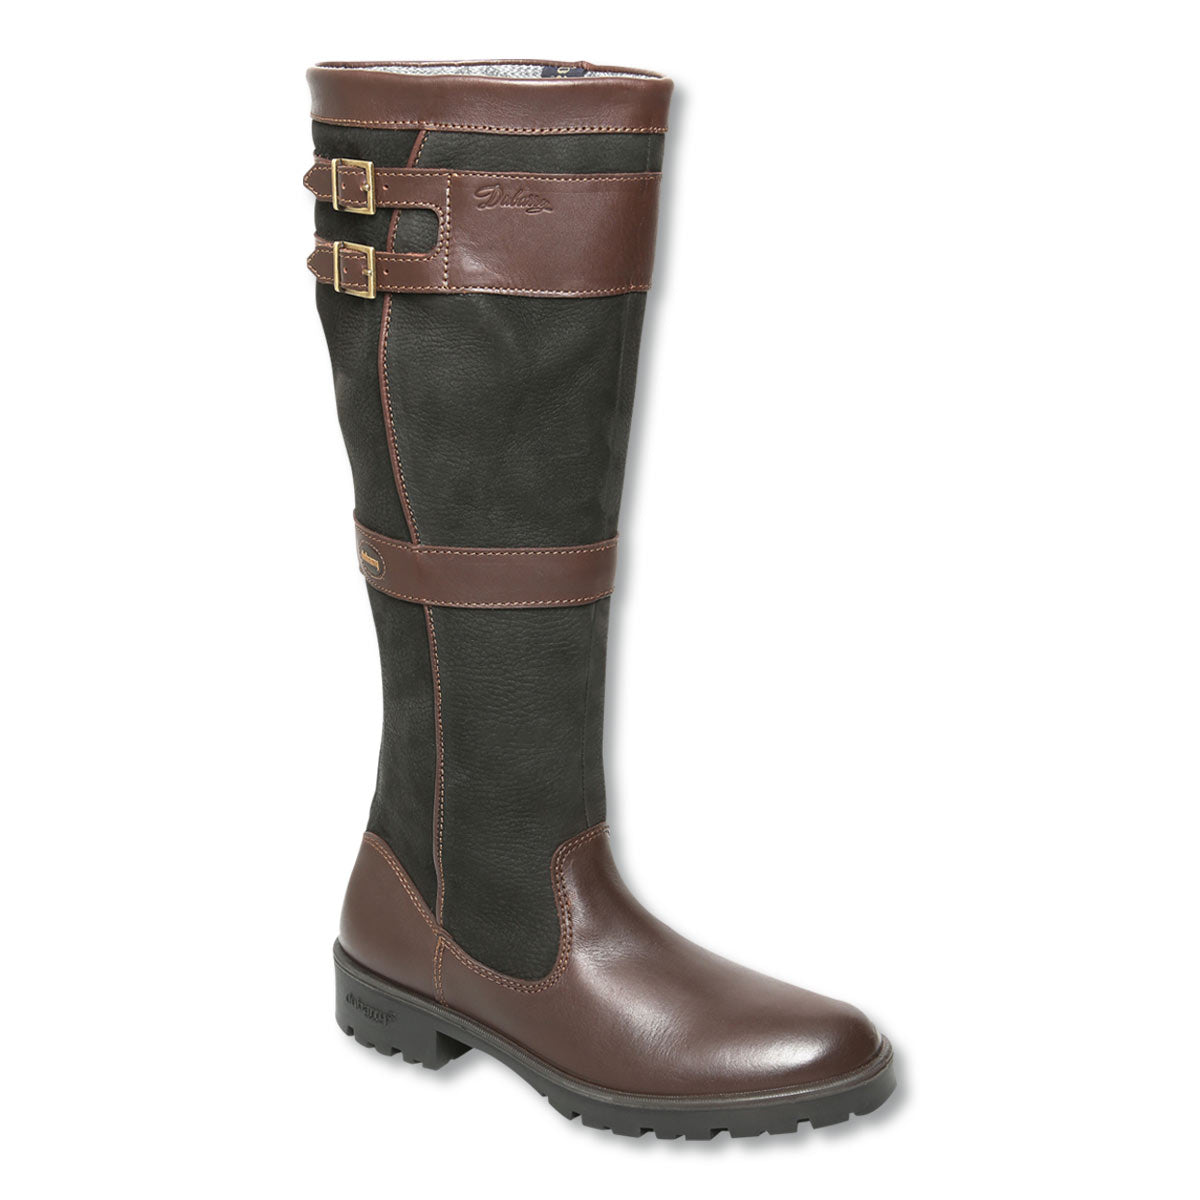 Longford Gore-tex Waterproof Lined Boot | Kevin's Catalog – Kevin's Fine & Apparel